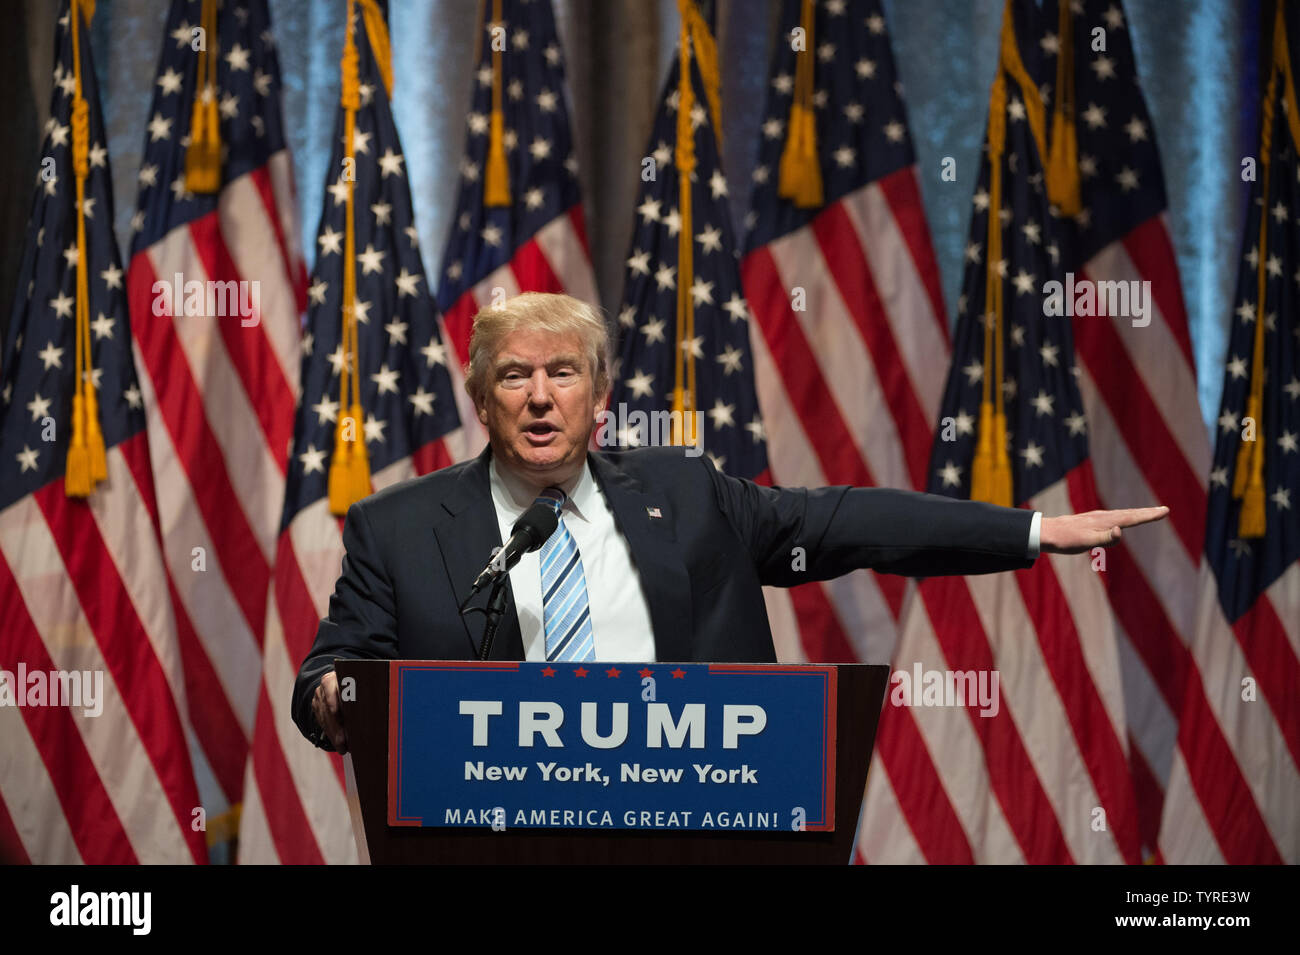 Presumptive Republican nominee for President Donald Trump speaks at a press conference at the New York Hilton on July 16, 2016 in New York City. Photo by Bryan R. Smith/UPI Stock Photo